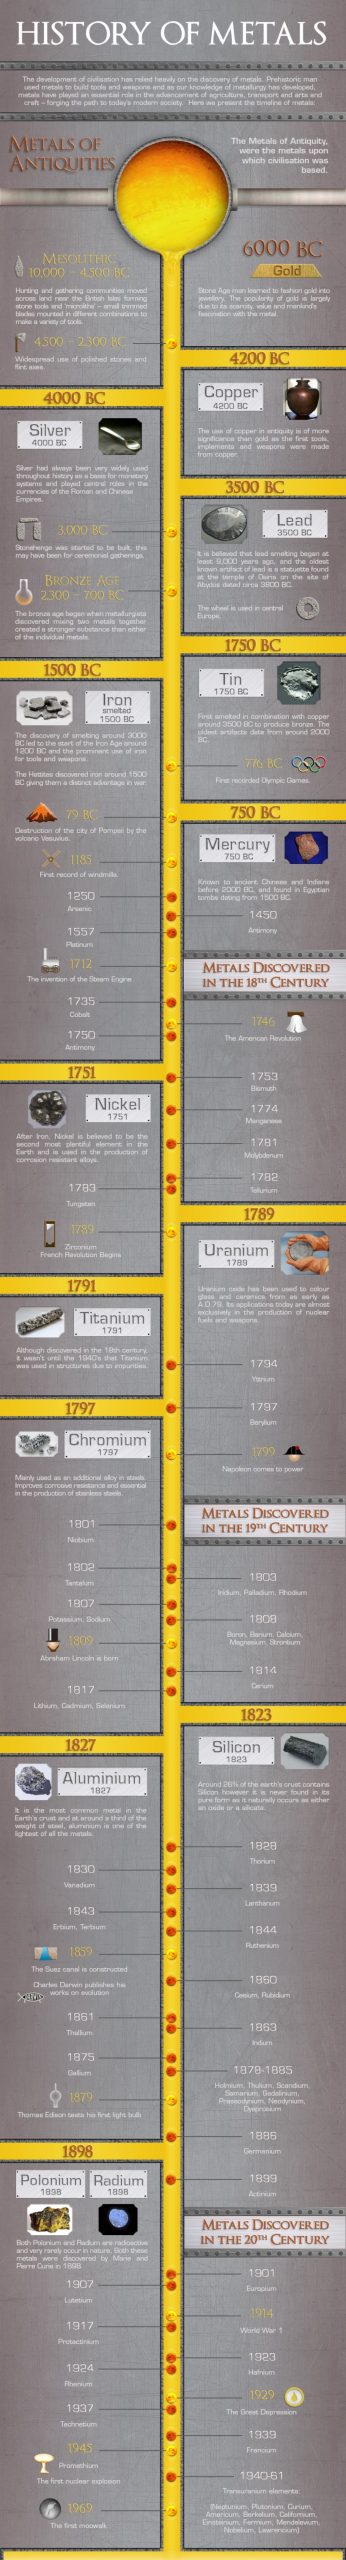 The History of Metals Timeline: How It All Started